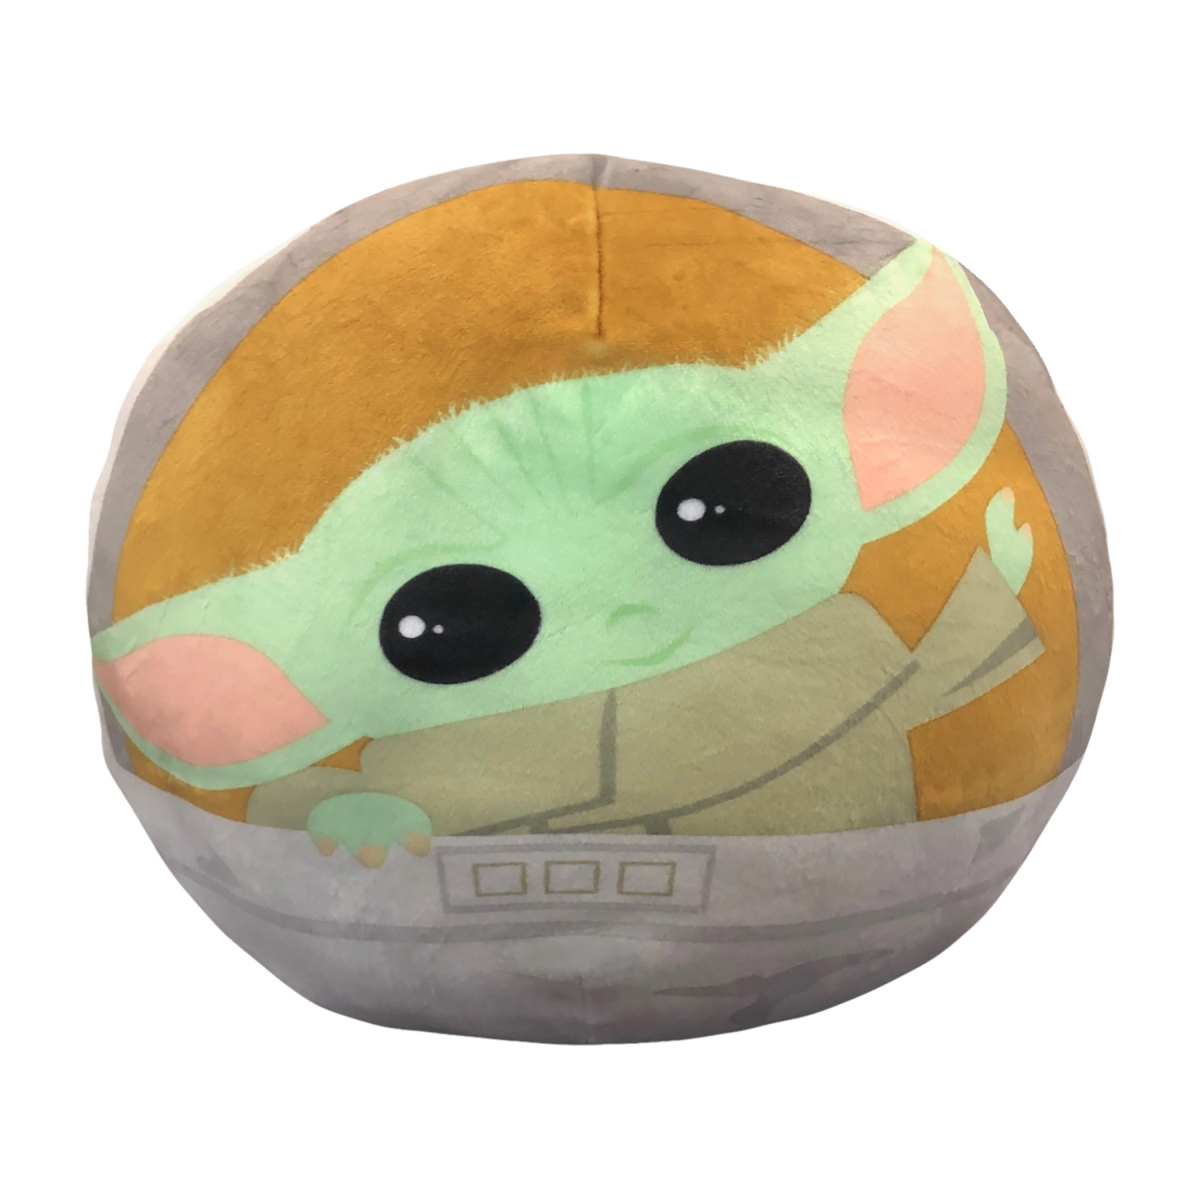 Star Wars 823768 11 in. the Mandalorian the Child Grogu Round Cloud Pillow